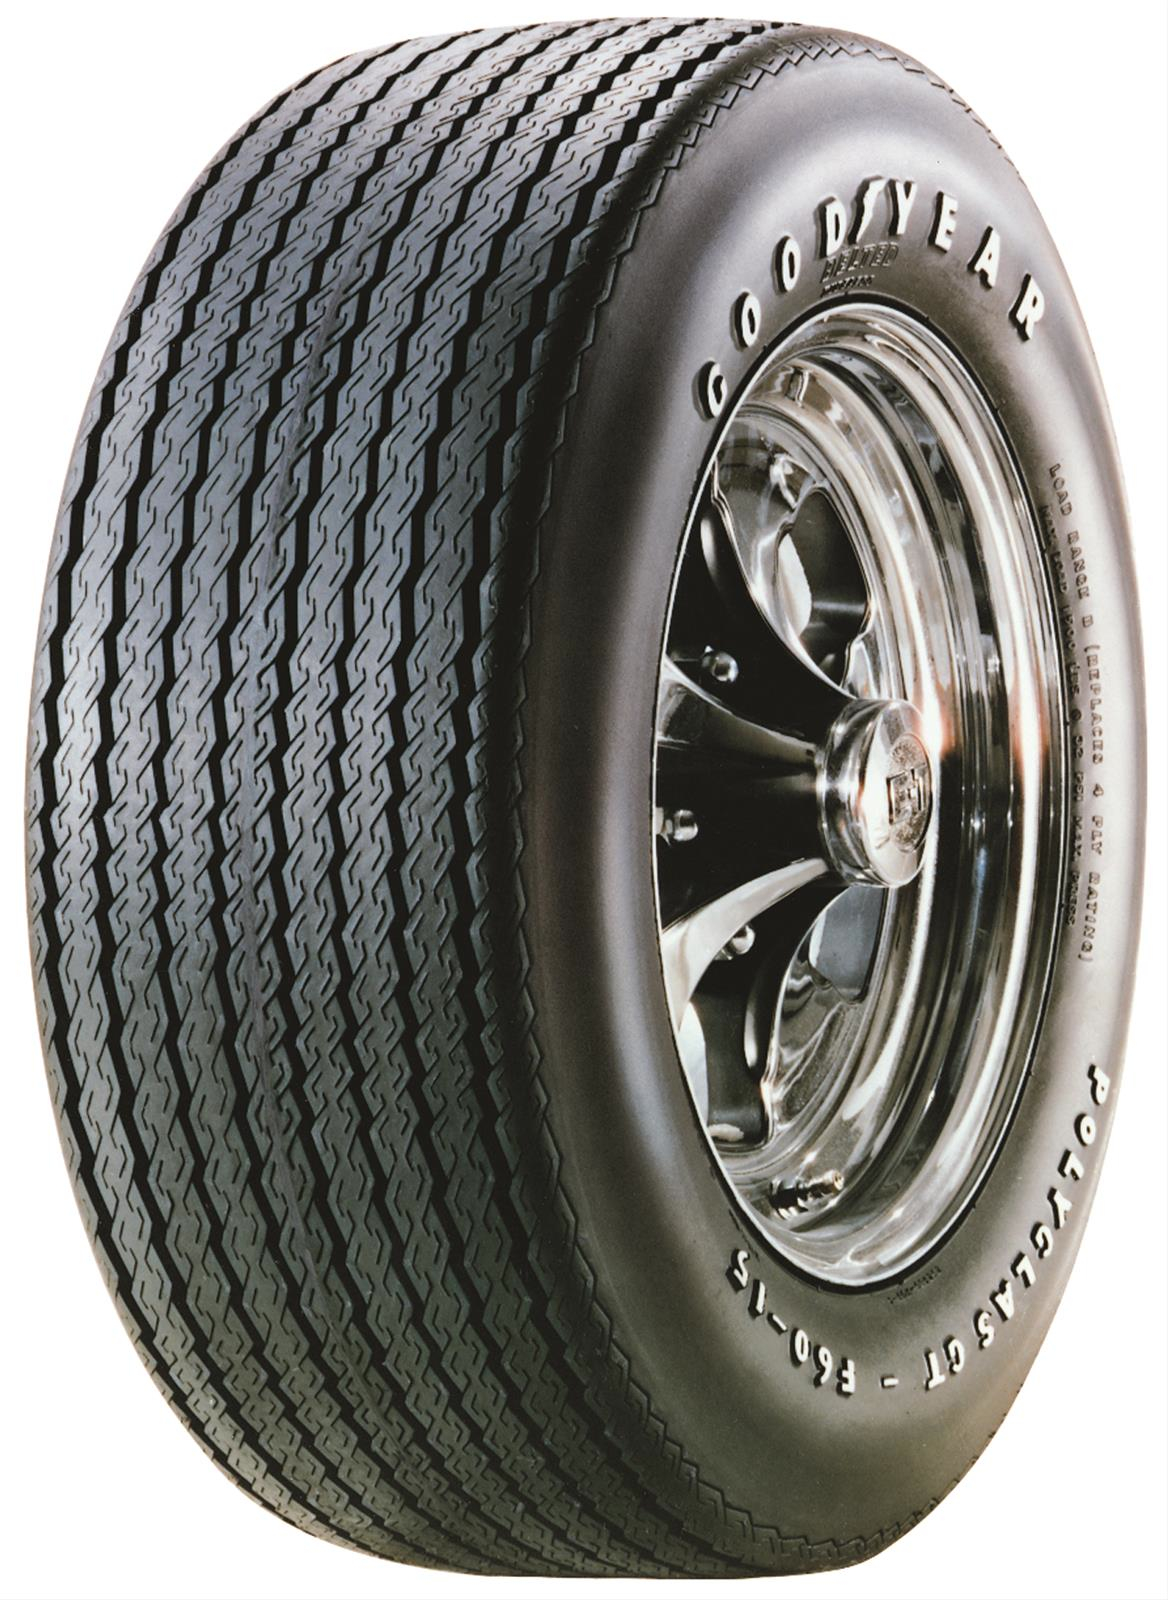 New at Summit Racing Equipment: Kelsey Tire Goodyear Reproduction Tires